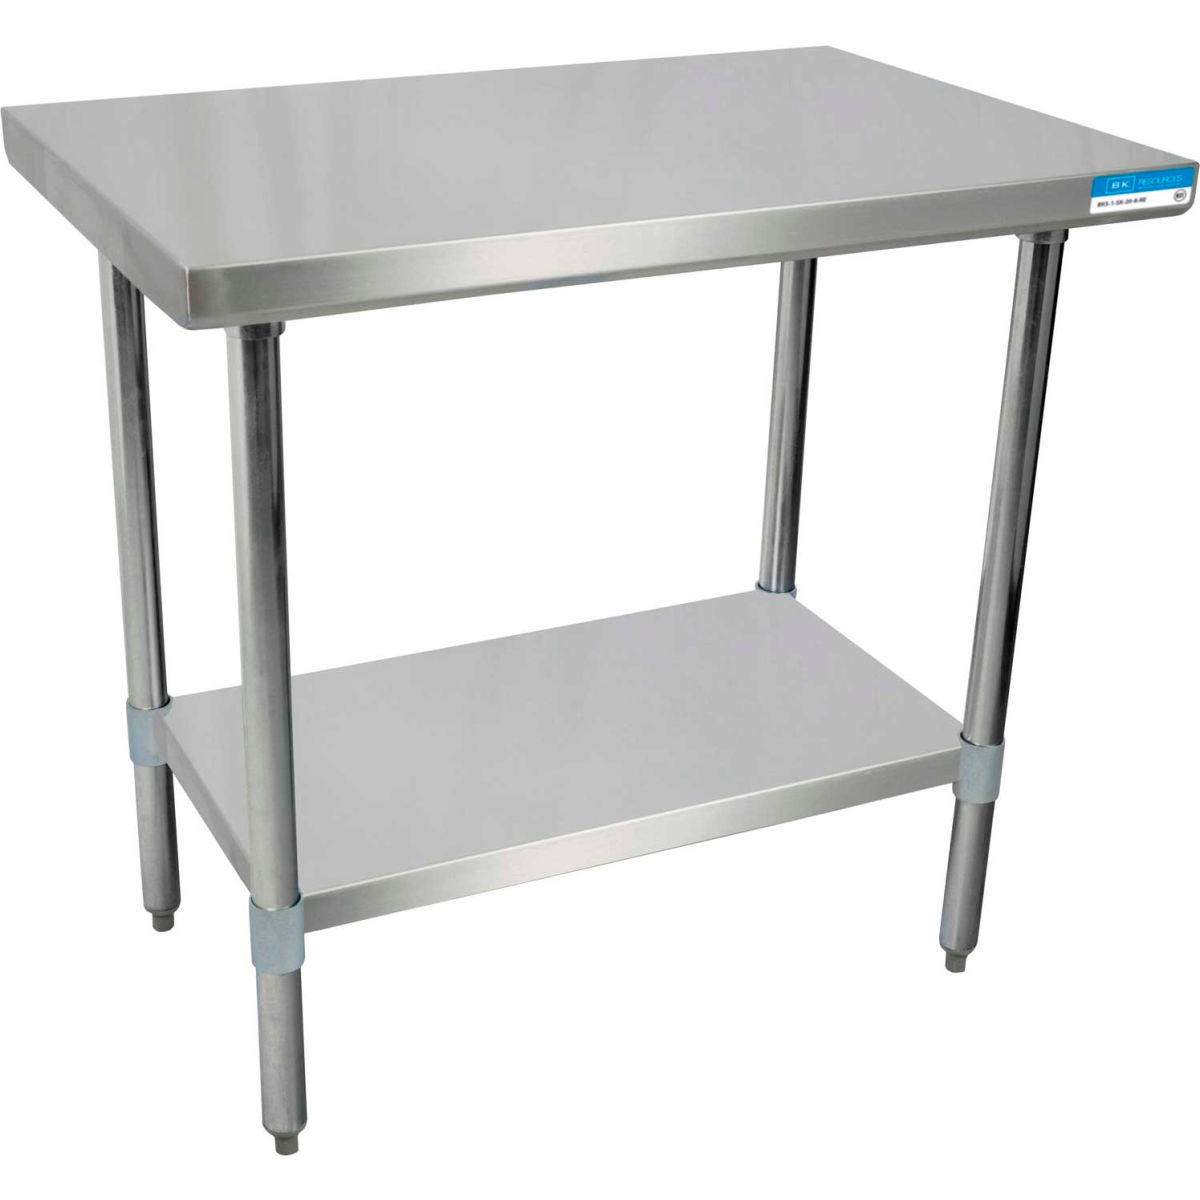 Picture of BK Resources B1516232 18 Gauge 430 Series Stainless Workbench with Undershelf - 24 x 18 in.